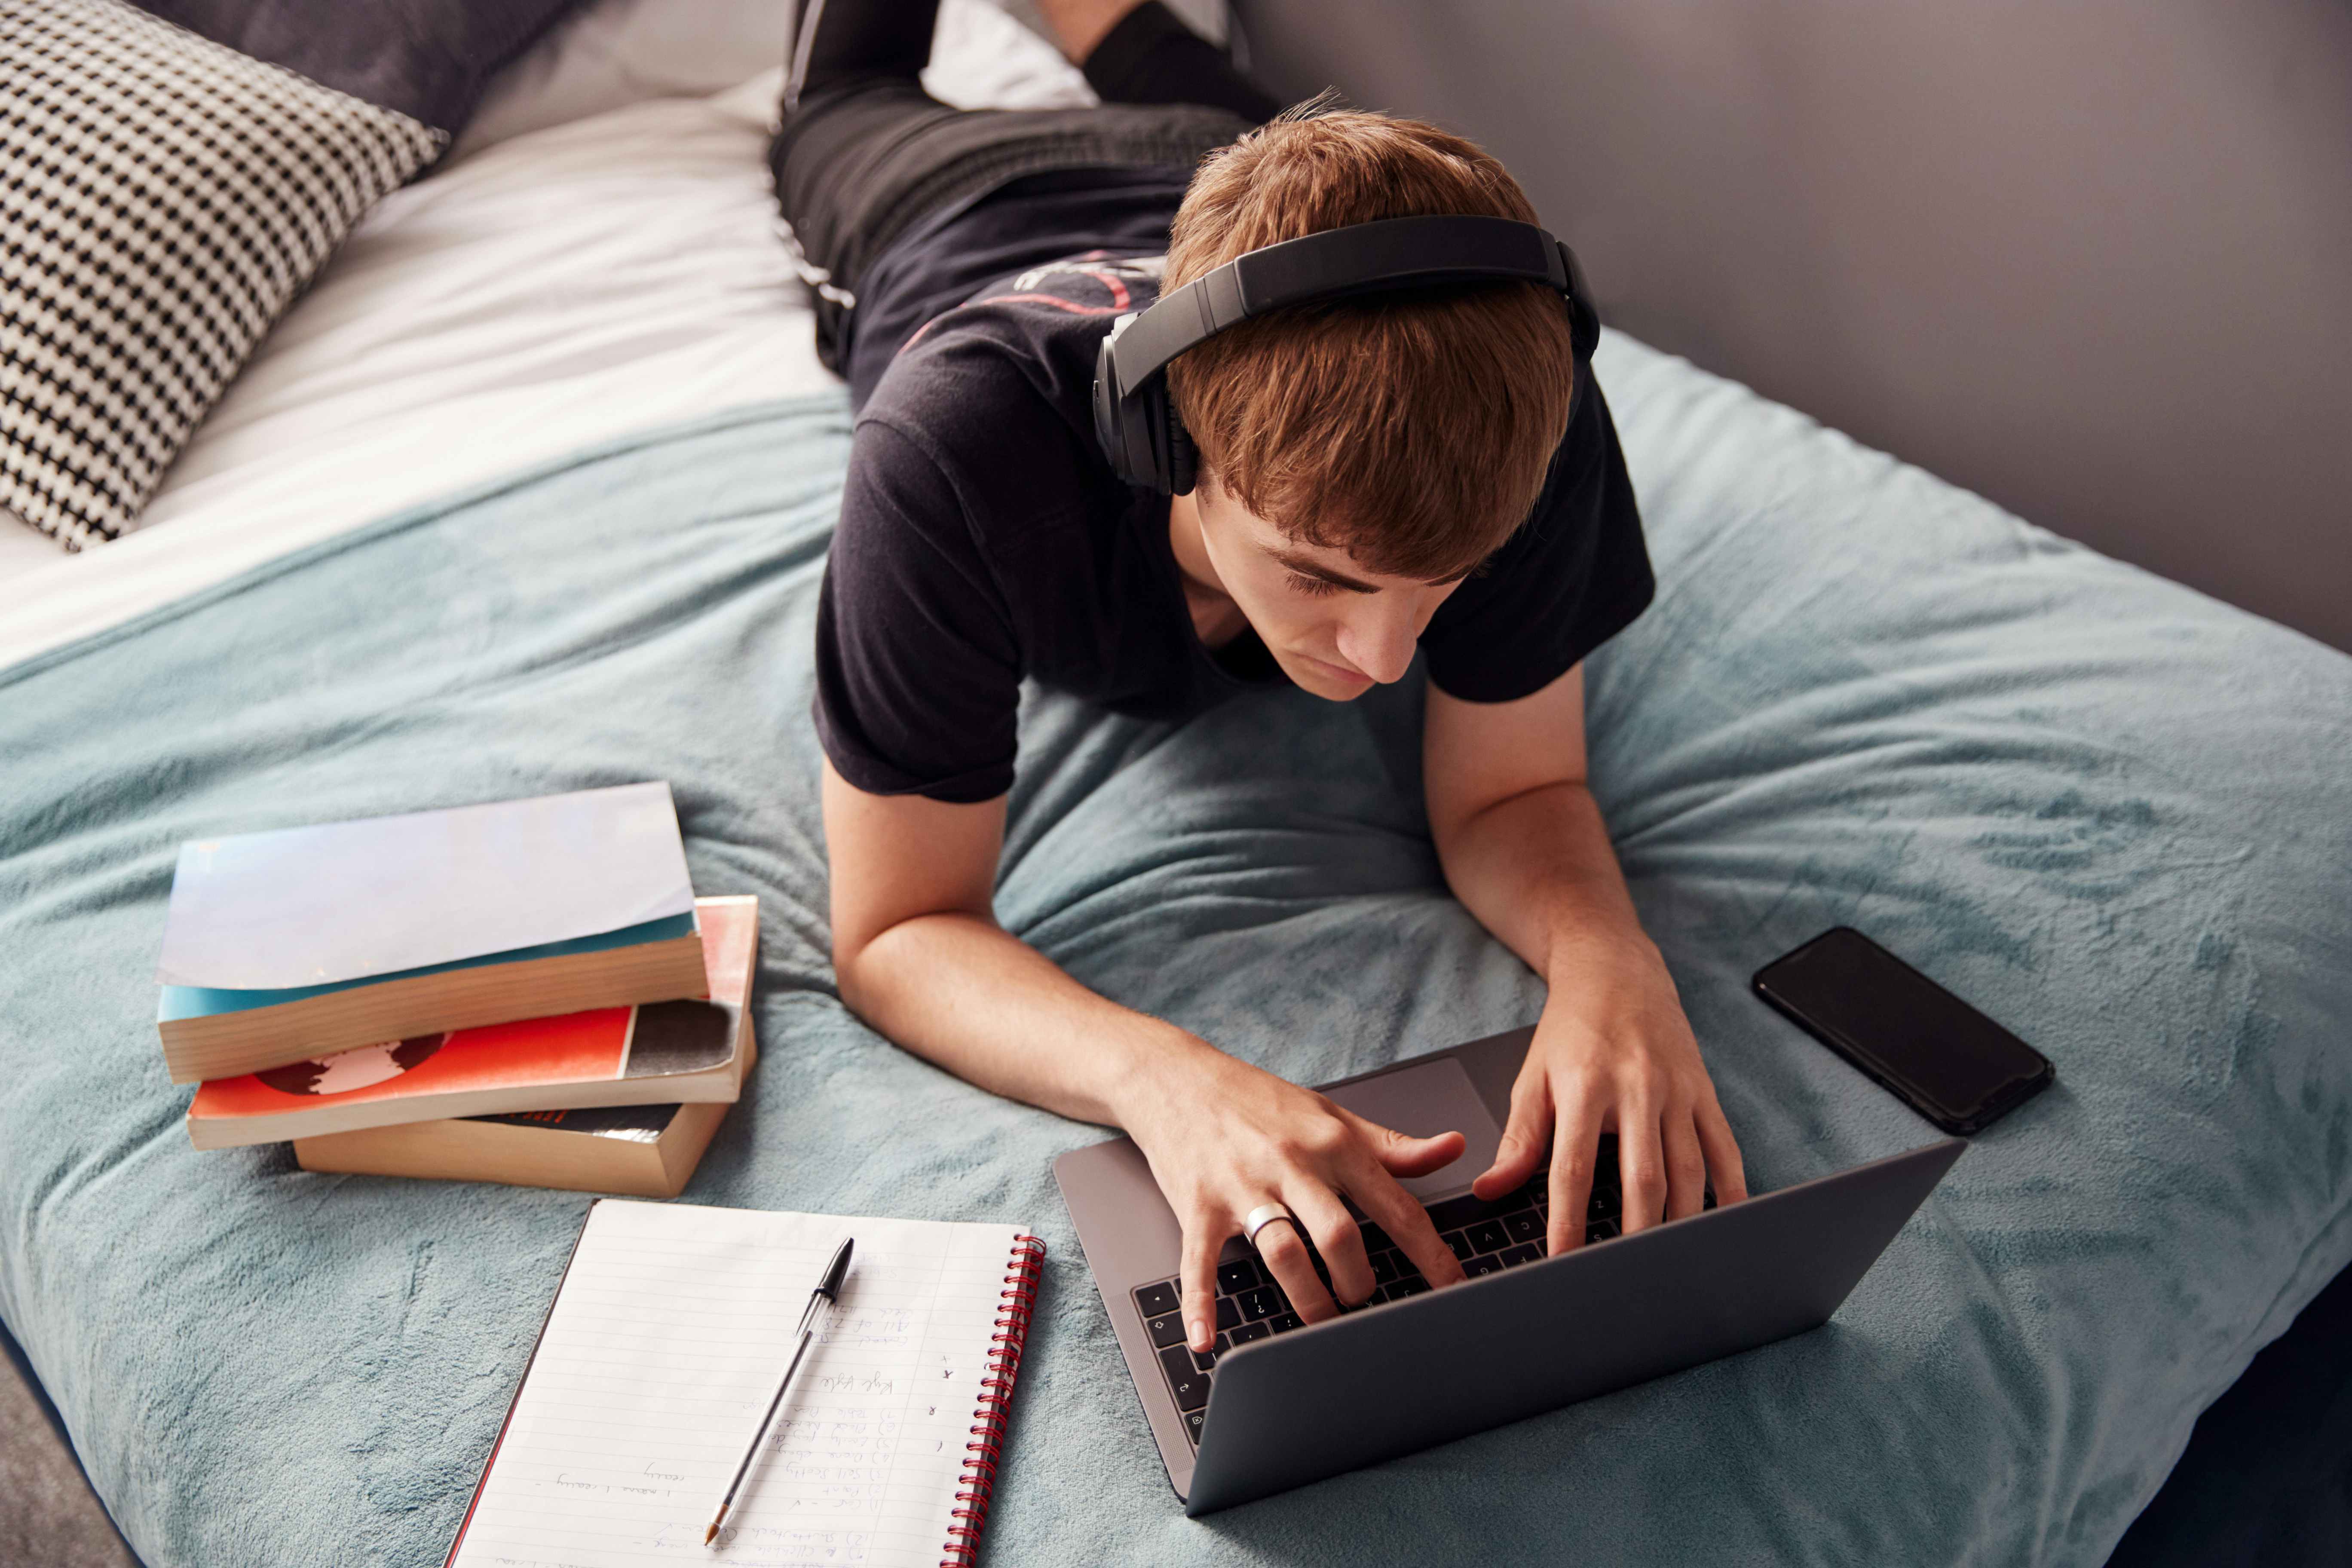 A student with headphones lying down, using a laptop on a bed next to some books, a notebook, and a phone.